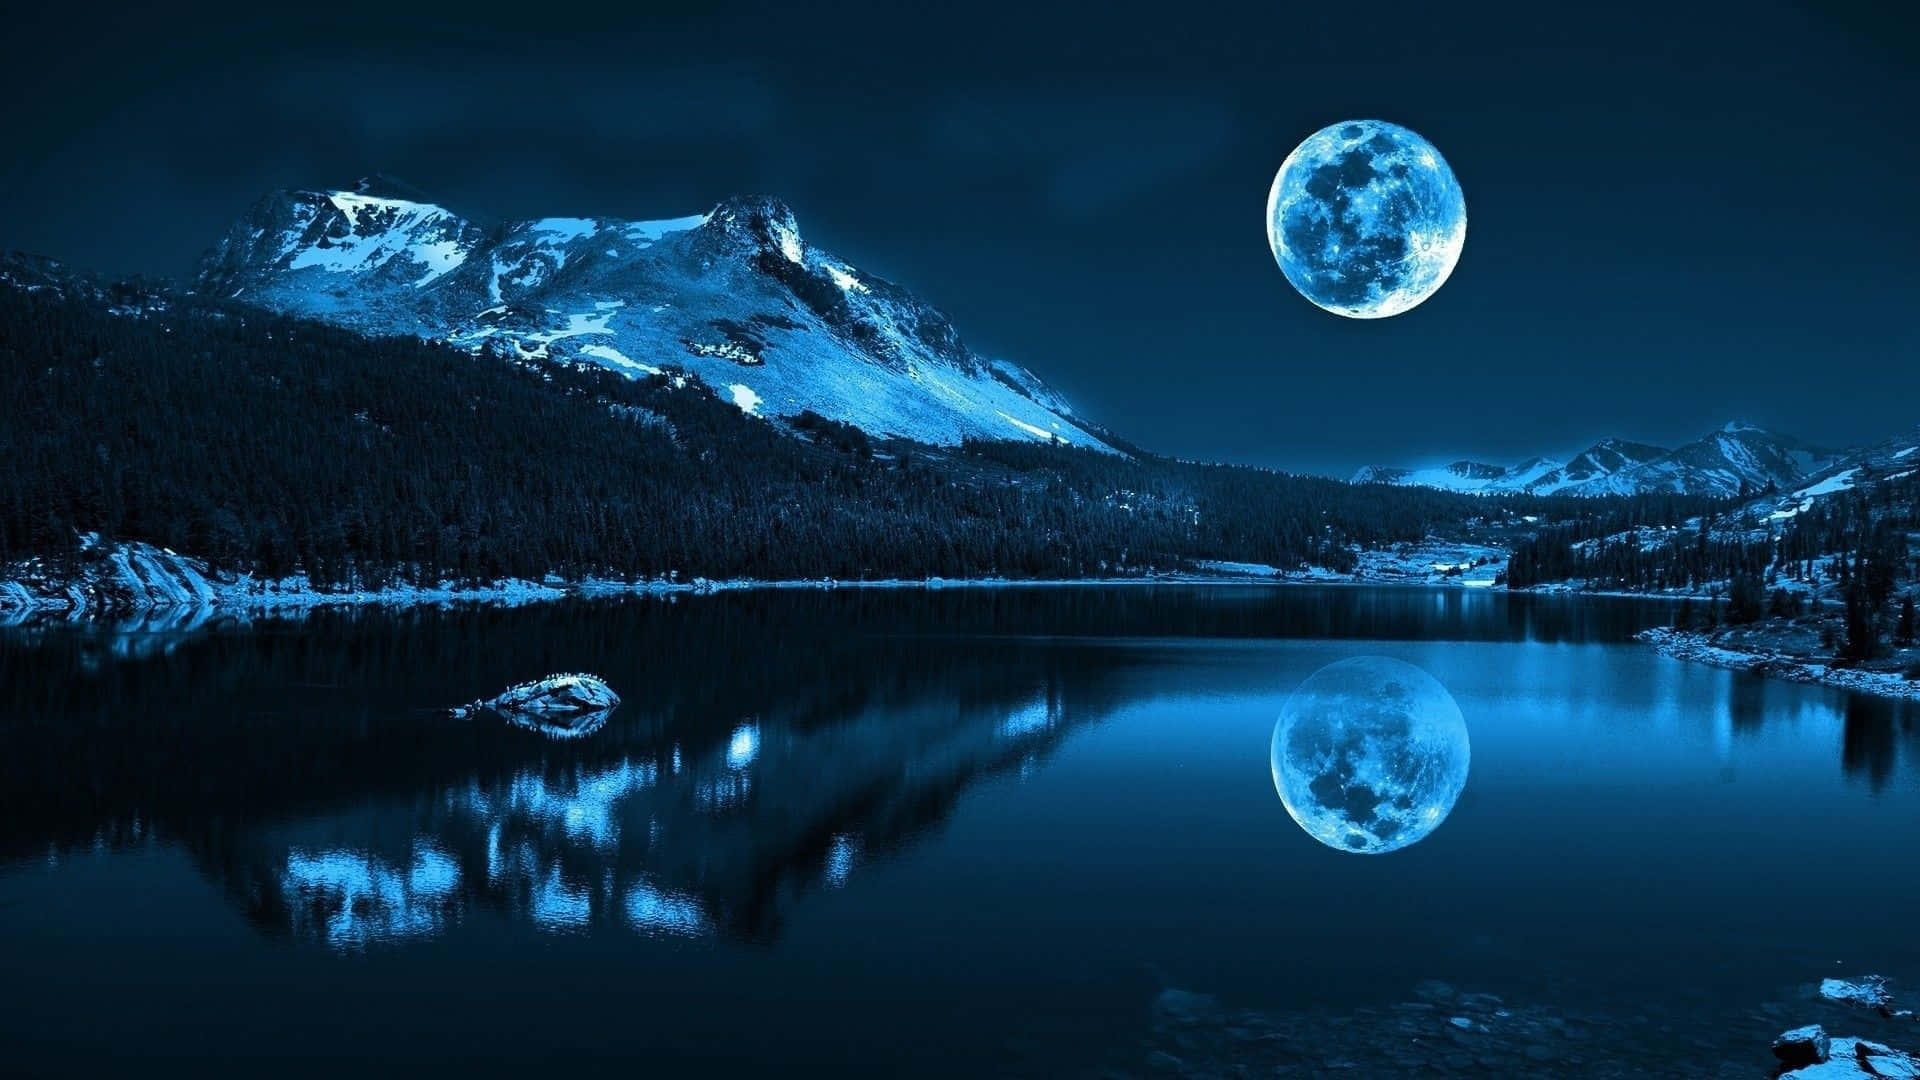 A Moon Is Reflected In A Lake At Night